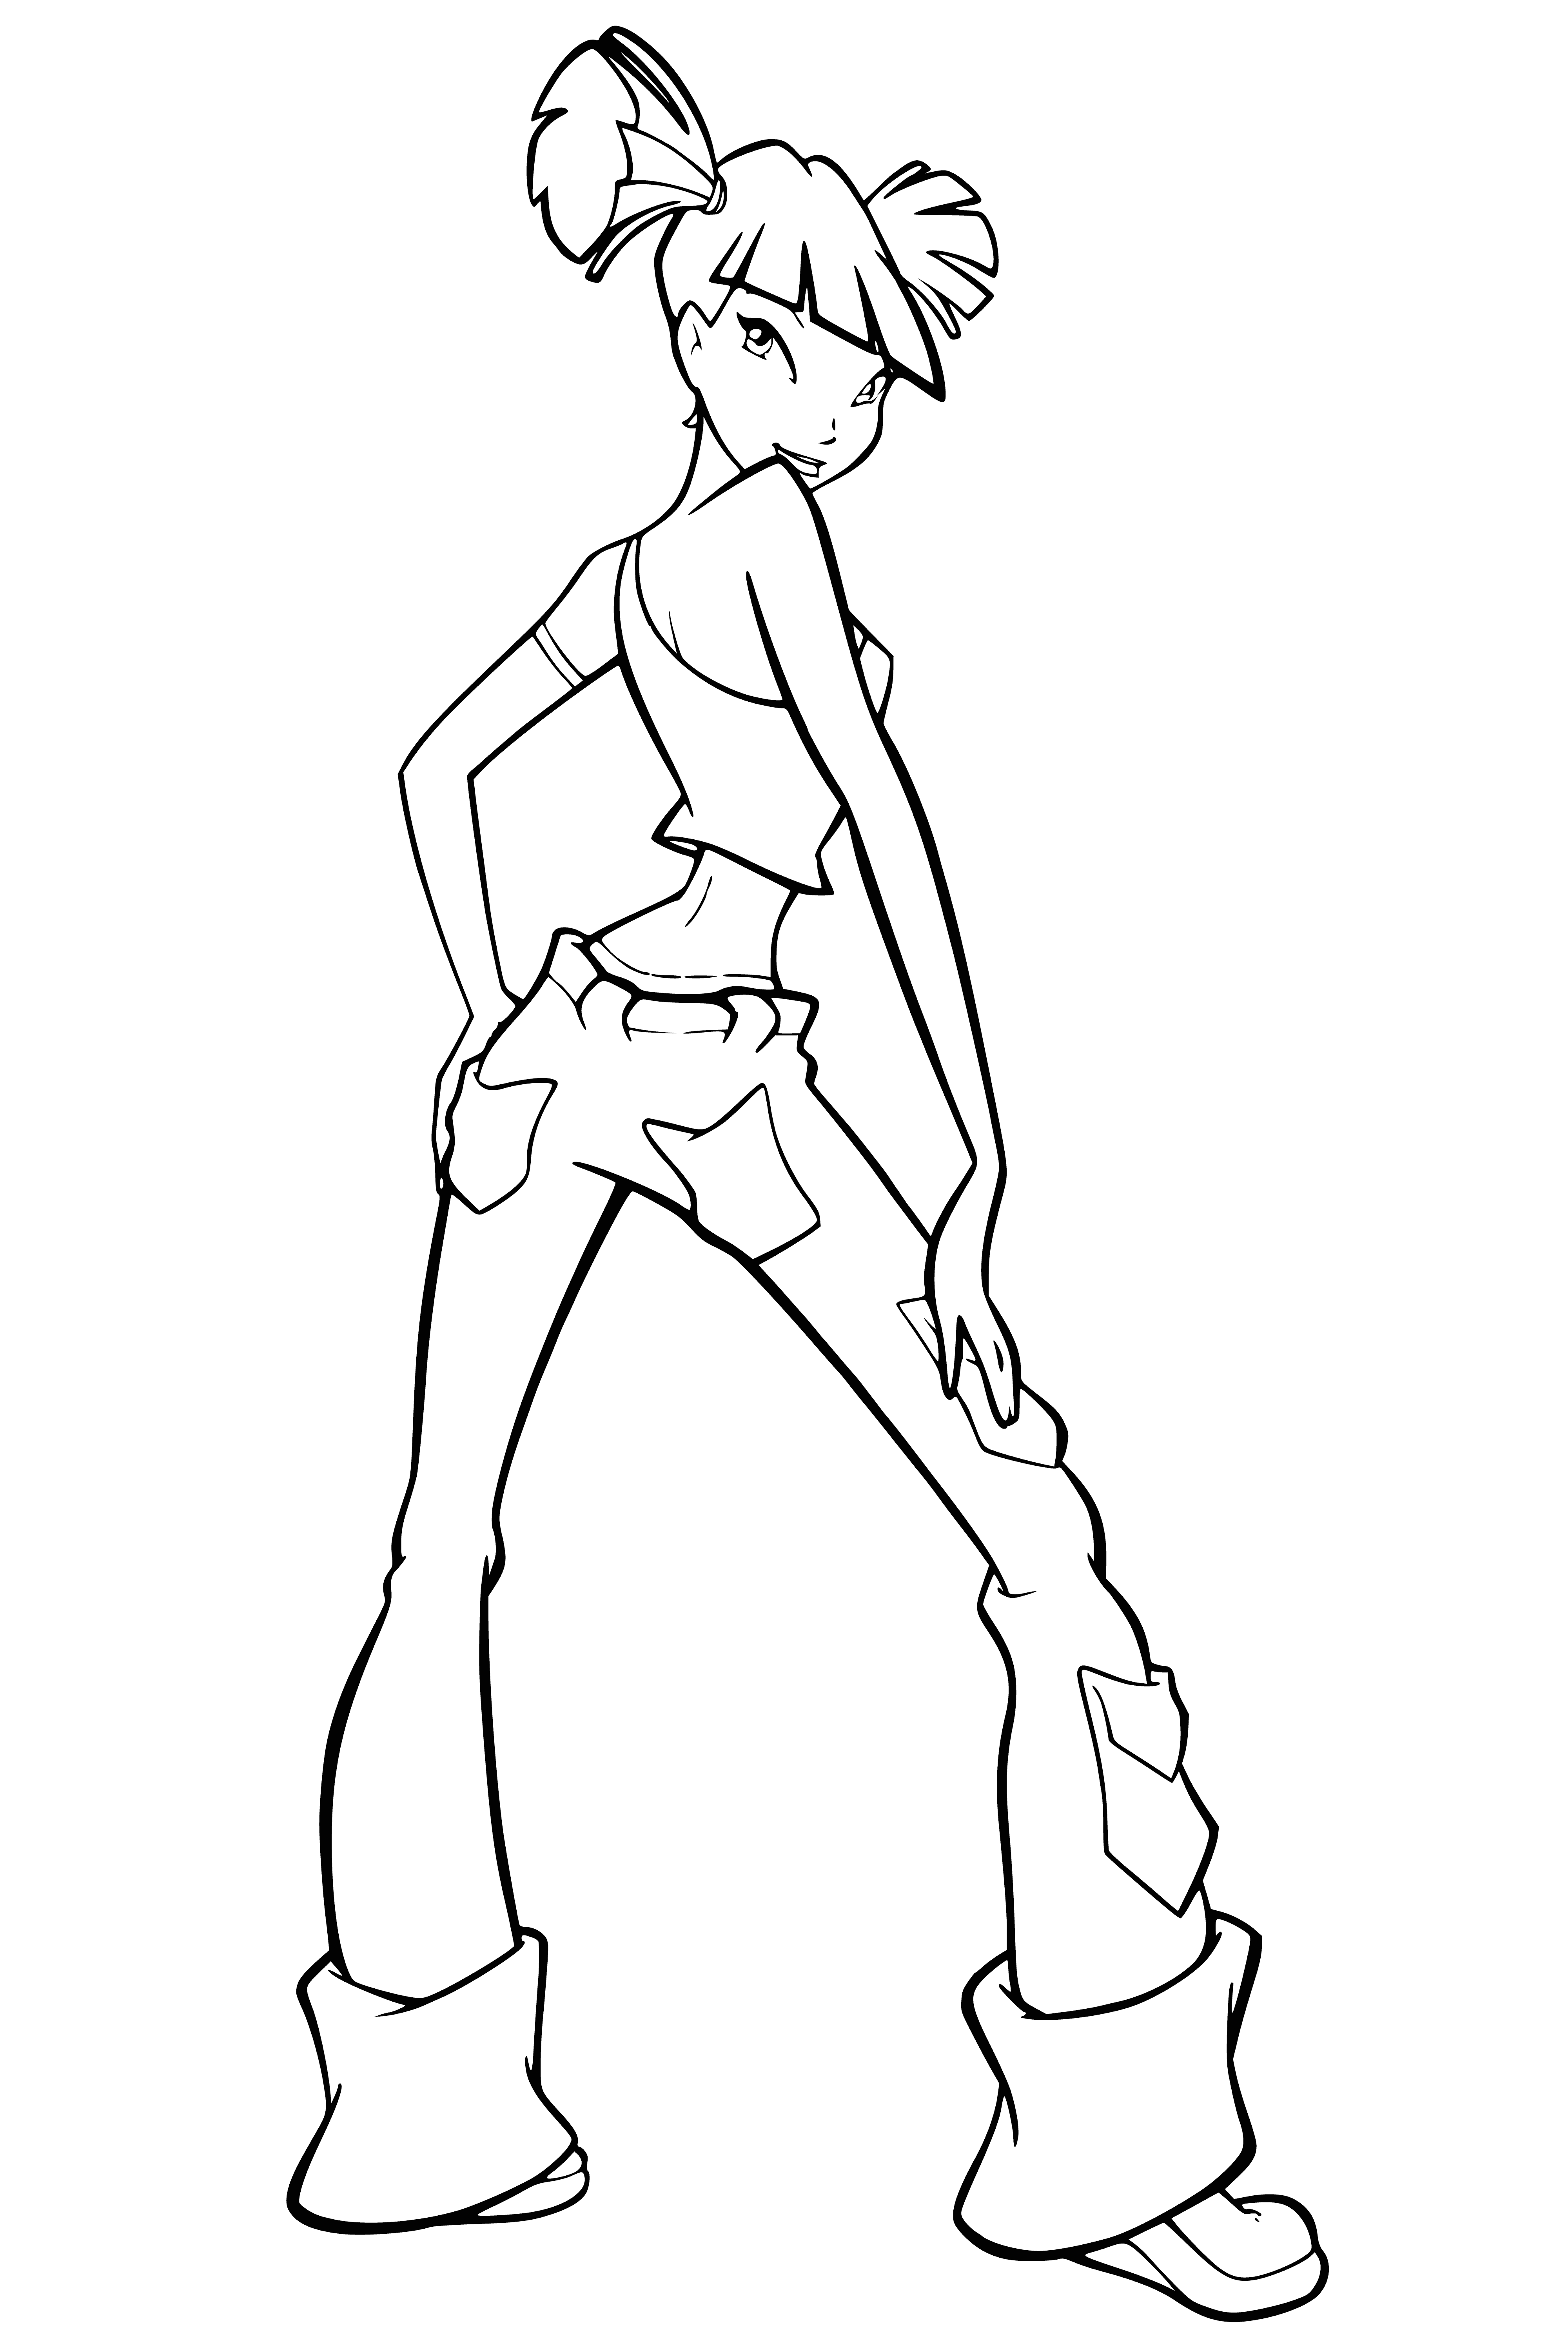 coloring page: Woman in trousers looks up to sky with wonder, shirt billowing in the wind, belt around her waist.